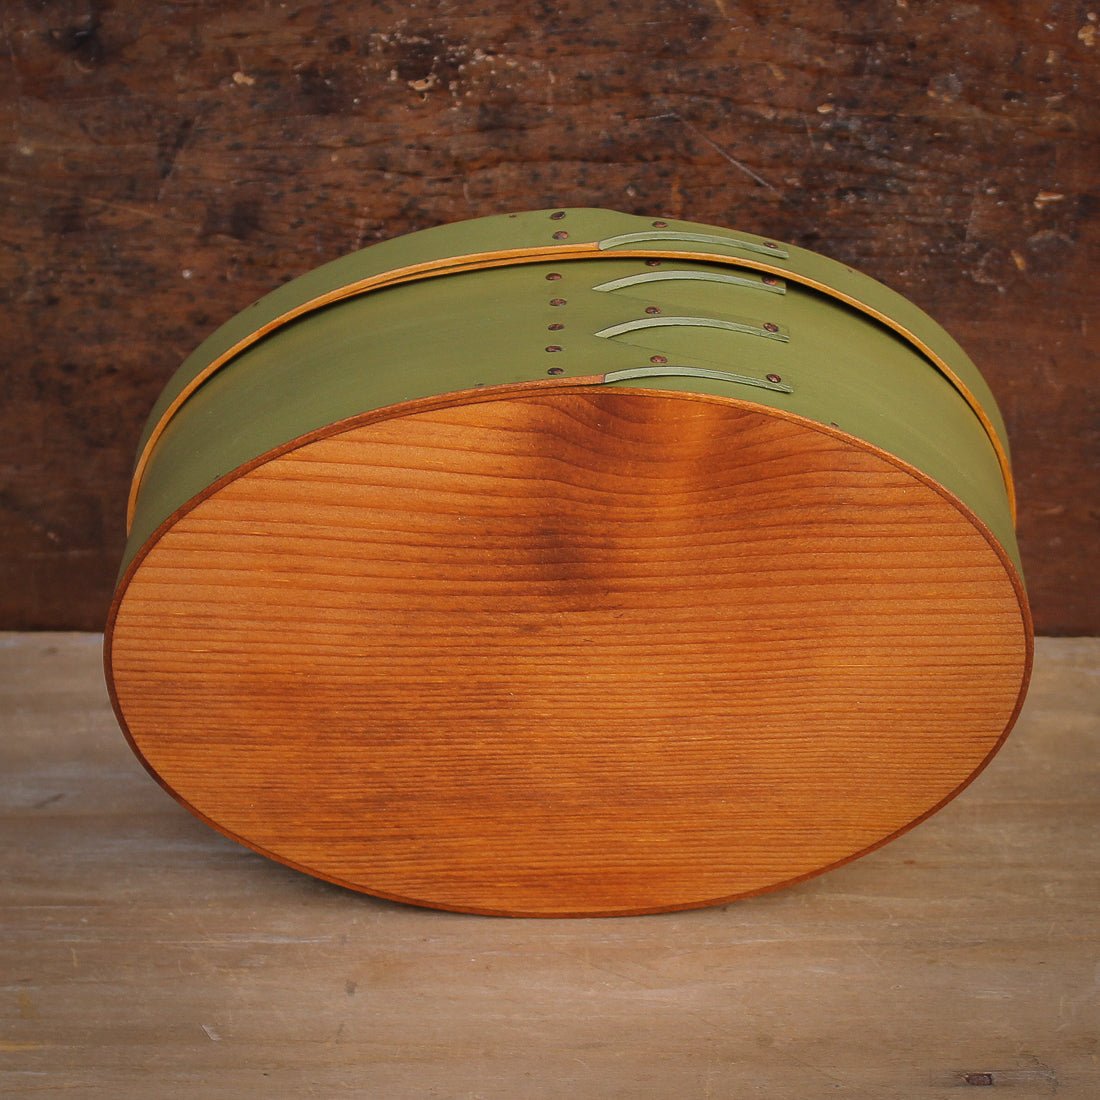 Shaker Oval Box, Size #4, LeHays Shaker Boxes, Handcrafted in Maine. Bottom View